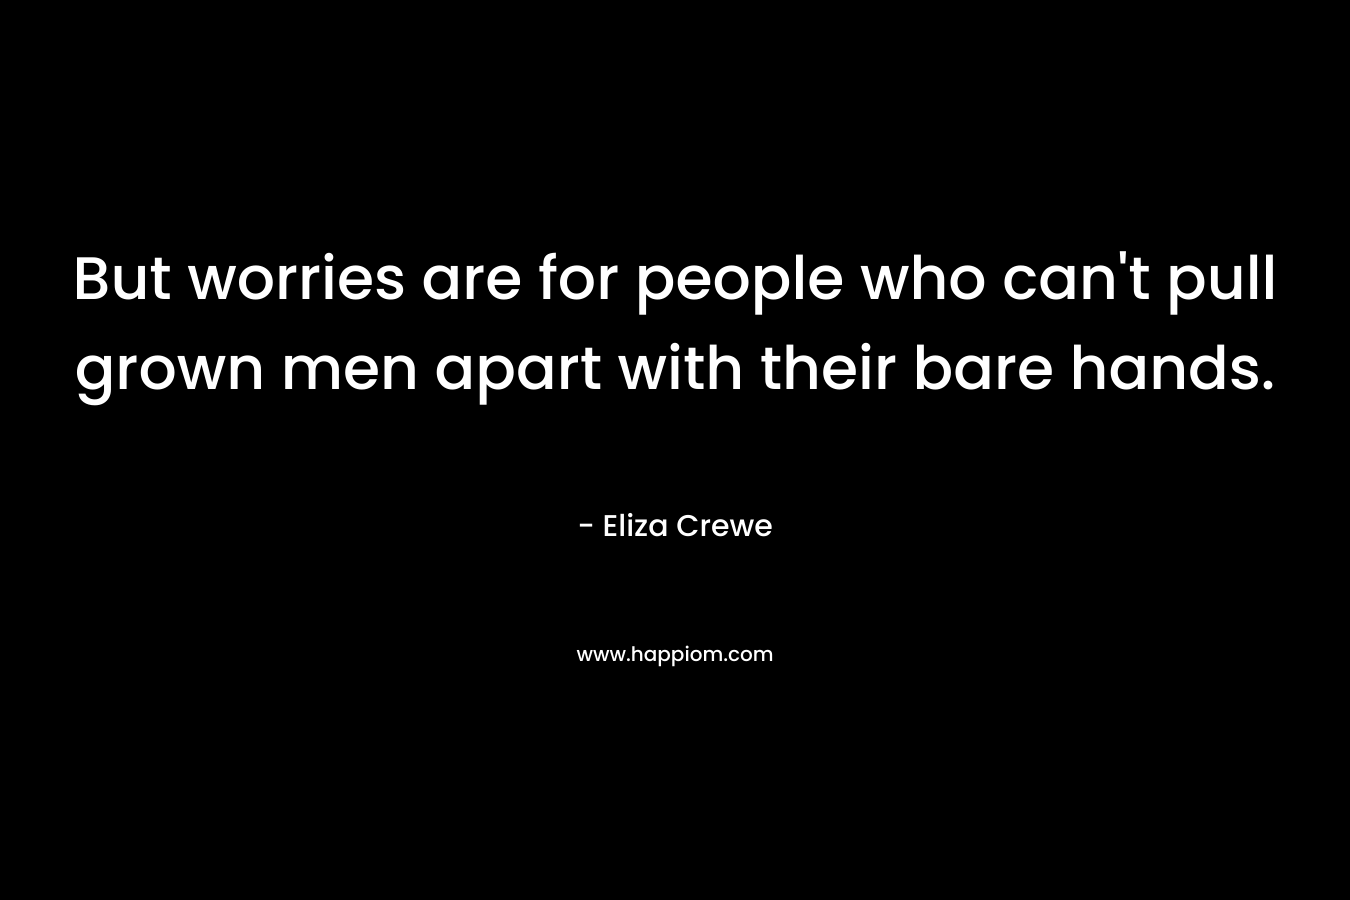 But worries are for people who can't pull grown men apart with their bare hands.